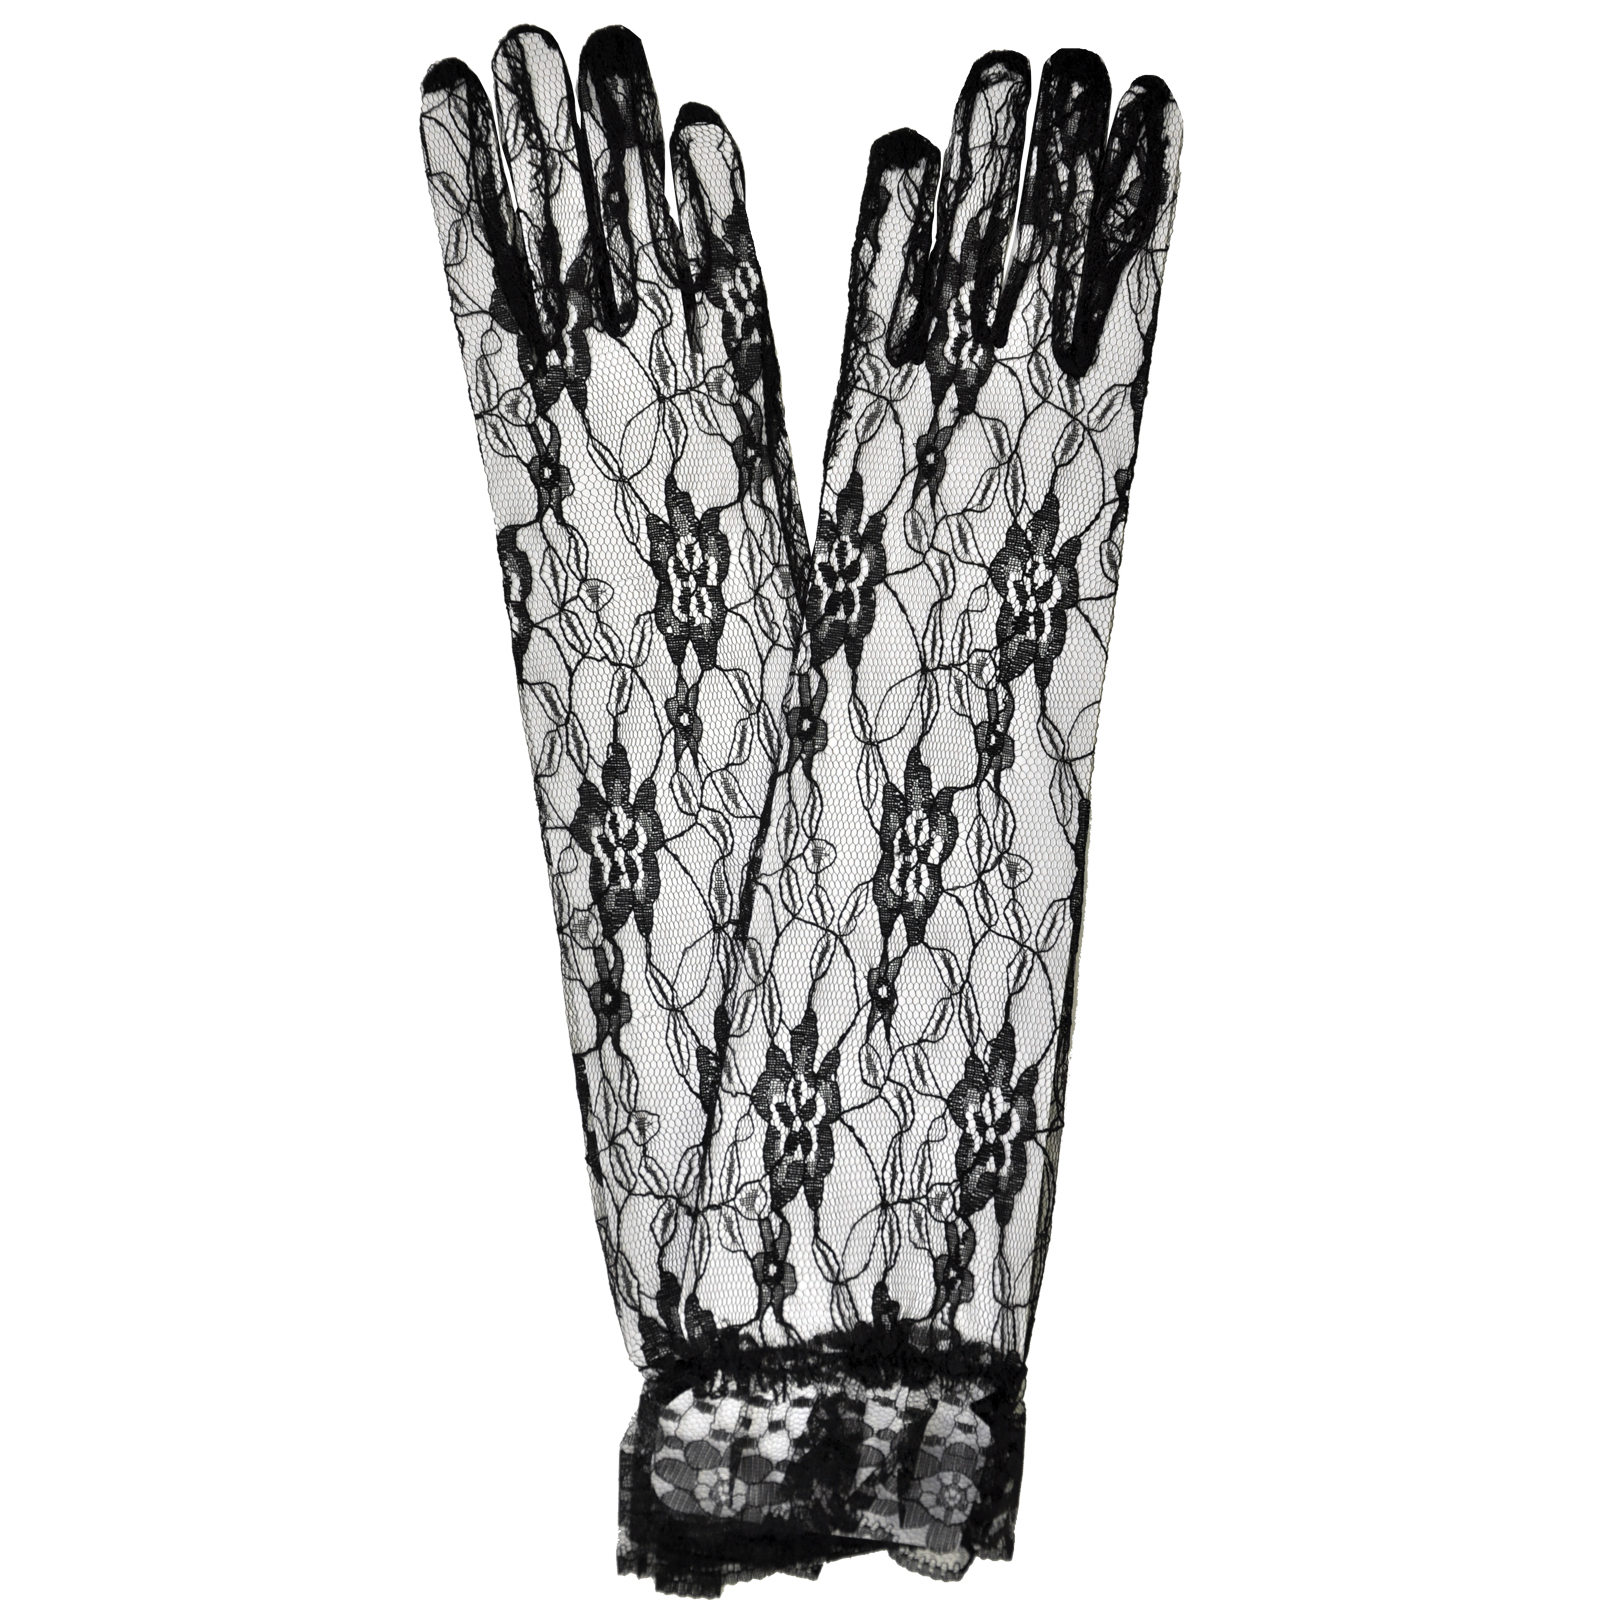 Gloves Black Lace Elbow Costume Accessory